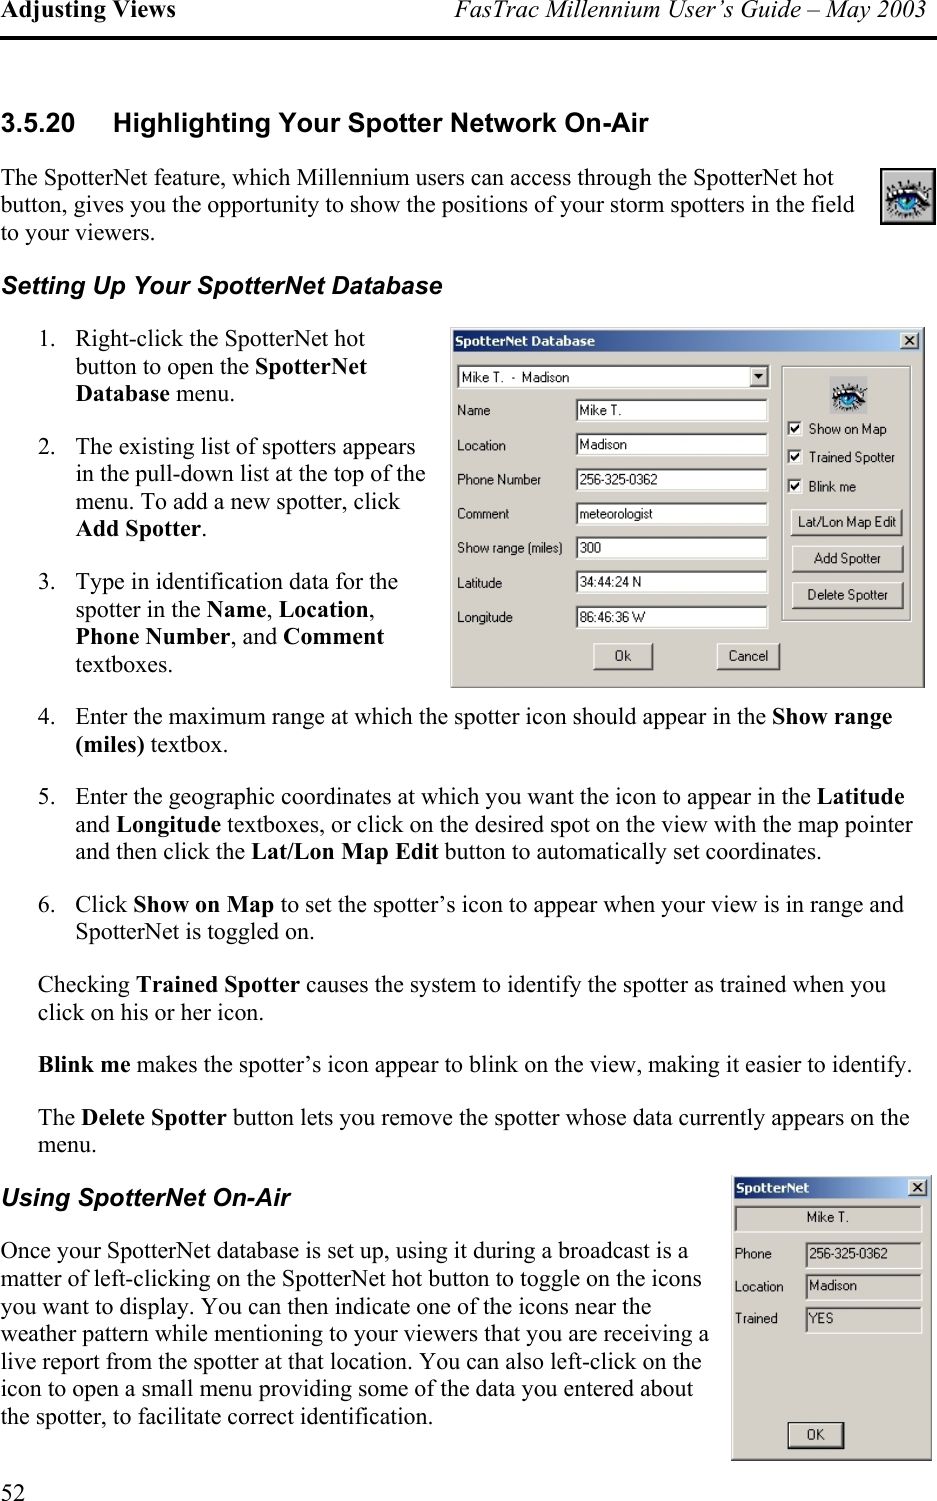 Adjusting Views  FasTrac Millennium User’s Guide – May 2003 3.5.20 Highlighting Your Spotter Network On-Air The SpotterNet feature, which Millennium users can access through the SpotterNet hot button, gives you the opportunity to show the positions of your storm spotters in the field to your viewers. Setting Up Your SpotterNet Database 1.  Right-click the SpotterNet hot button to open the SpotterNet Database menu. 2.  The existing list of spotters appears in the pull-down list at the top of the menu. To add a new spotter, click Add Spotter. 3.  Type in identification data for the spotter in the Name, Location, Phone Number, and Comment textboxes. 4.  Enter the maximum range at which the spotter icon should appear in the Show range (miles) textbox. 5.  Enter the geographic coordinates at which you want the icon to appear in the Latitude and Longitude textboxes, or click on the desired spot on the view with the map pointer and then click the Lat/Lon Map Edit button to automatically set coordinates. 6. Click Show on Map to set the spotter’s icon to appear when your view is in range and SpotterNet is toggled on. Checking Trained Spotter causes the system to identify the spotter as trained when you click on his or her icon. Blink me makes the spotter’s icon appear to blink on the view, making it easier to identify. The Delete Spotter button lets you remove the spotter whose data currently appears on the menu. Using SpotterNet On-Air Once your SpotterNet database is set up, using it during a broadcast is a matter of left-clicking on the SpotterNet hot button to toggle on the icons you want to display. You can then indicate one of the icons near the weather pattern while mentioning to your viewers that you are receiving a live report from the spotter at that location. You can also left-click on the icon to open a small menu providing some of the data you entered about the spotter, to facilitate correct identification. 52 